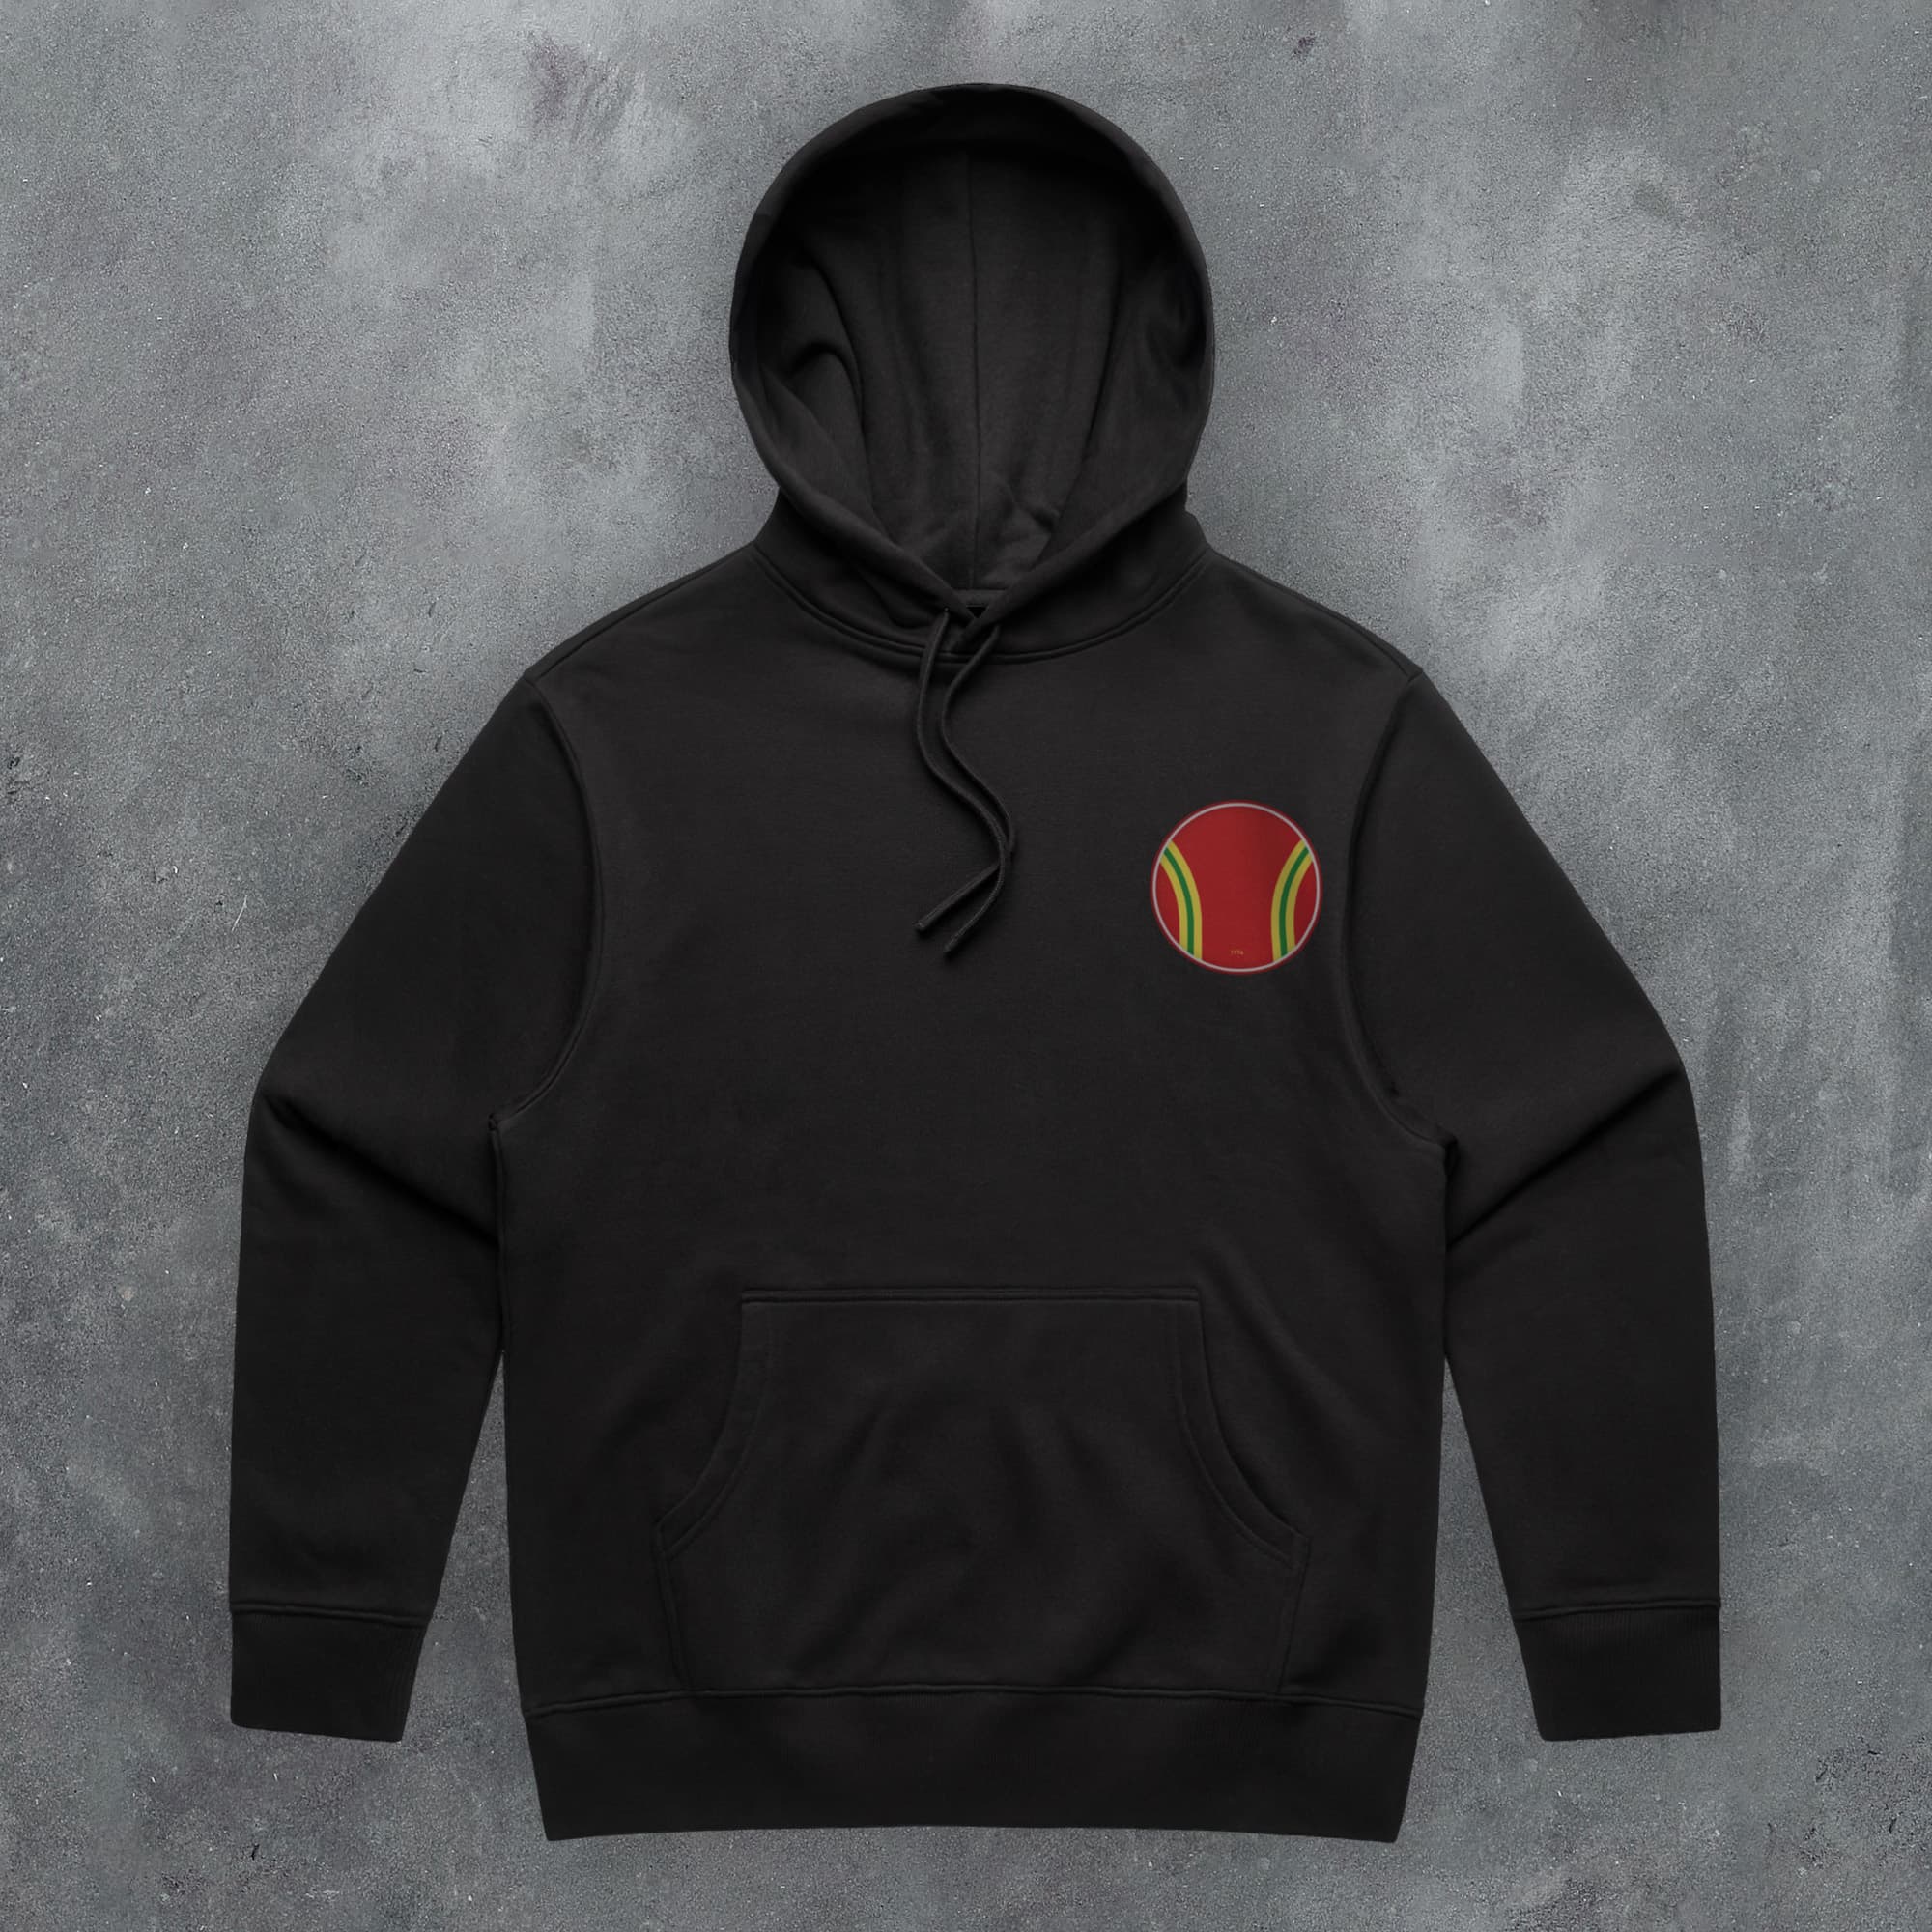 a black hoodie with a red and yellow logo